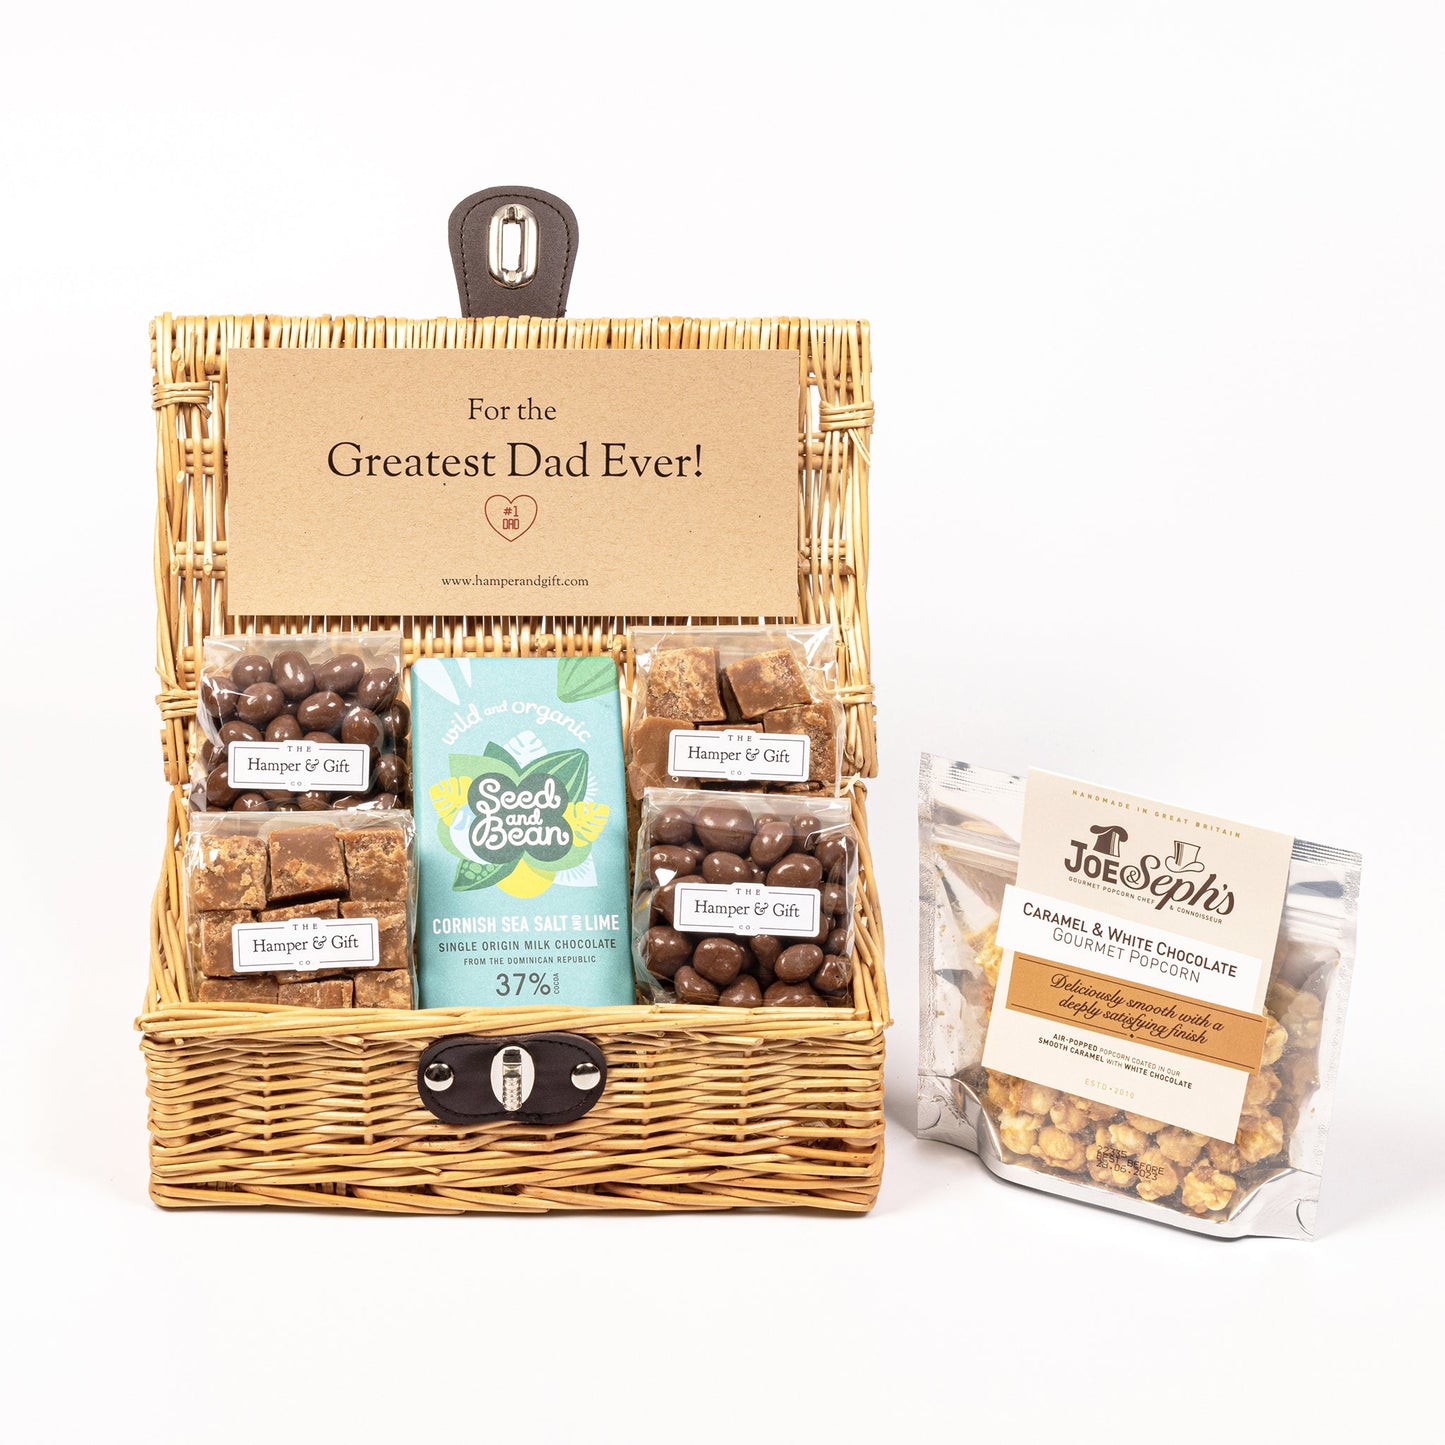 Greatest Dad Hamper filled with chocolate, fudge and gourmet popcorn